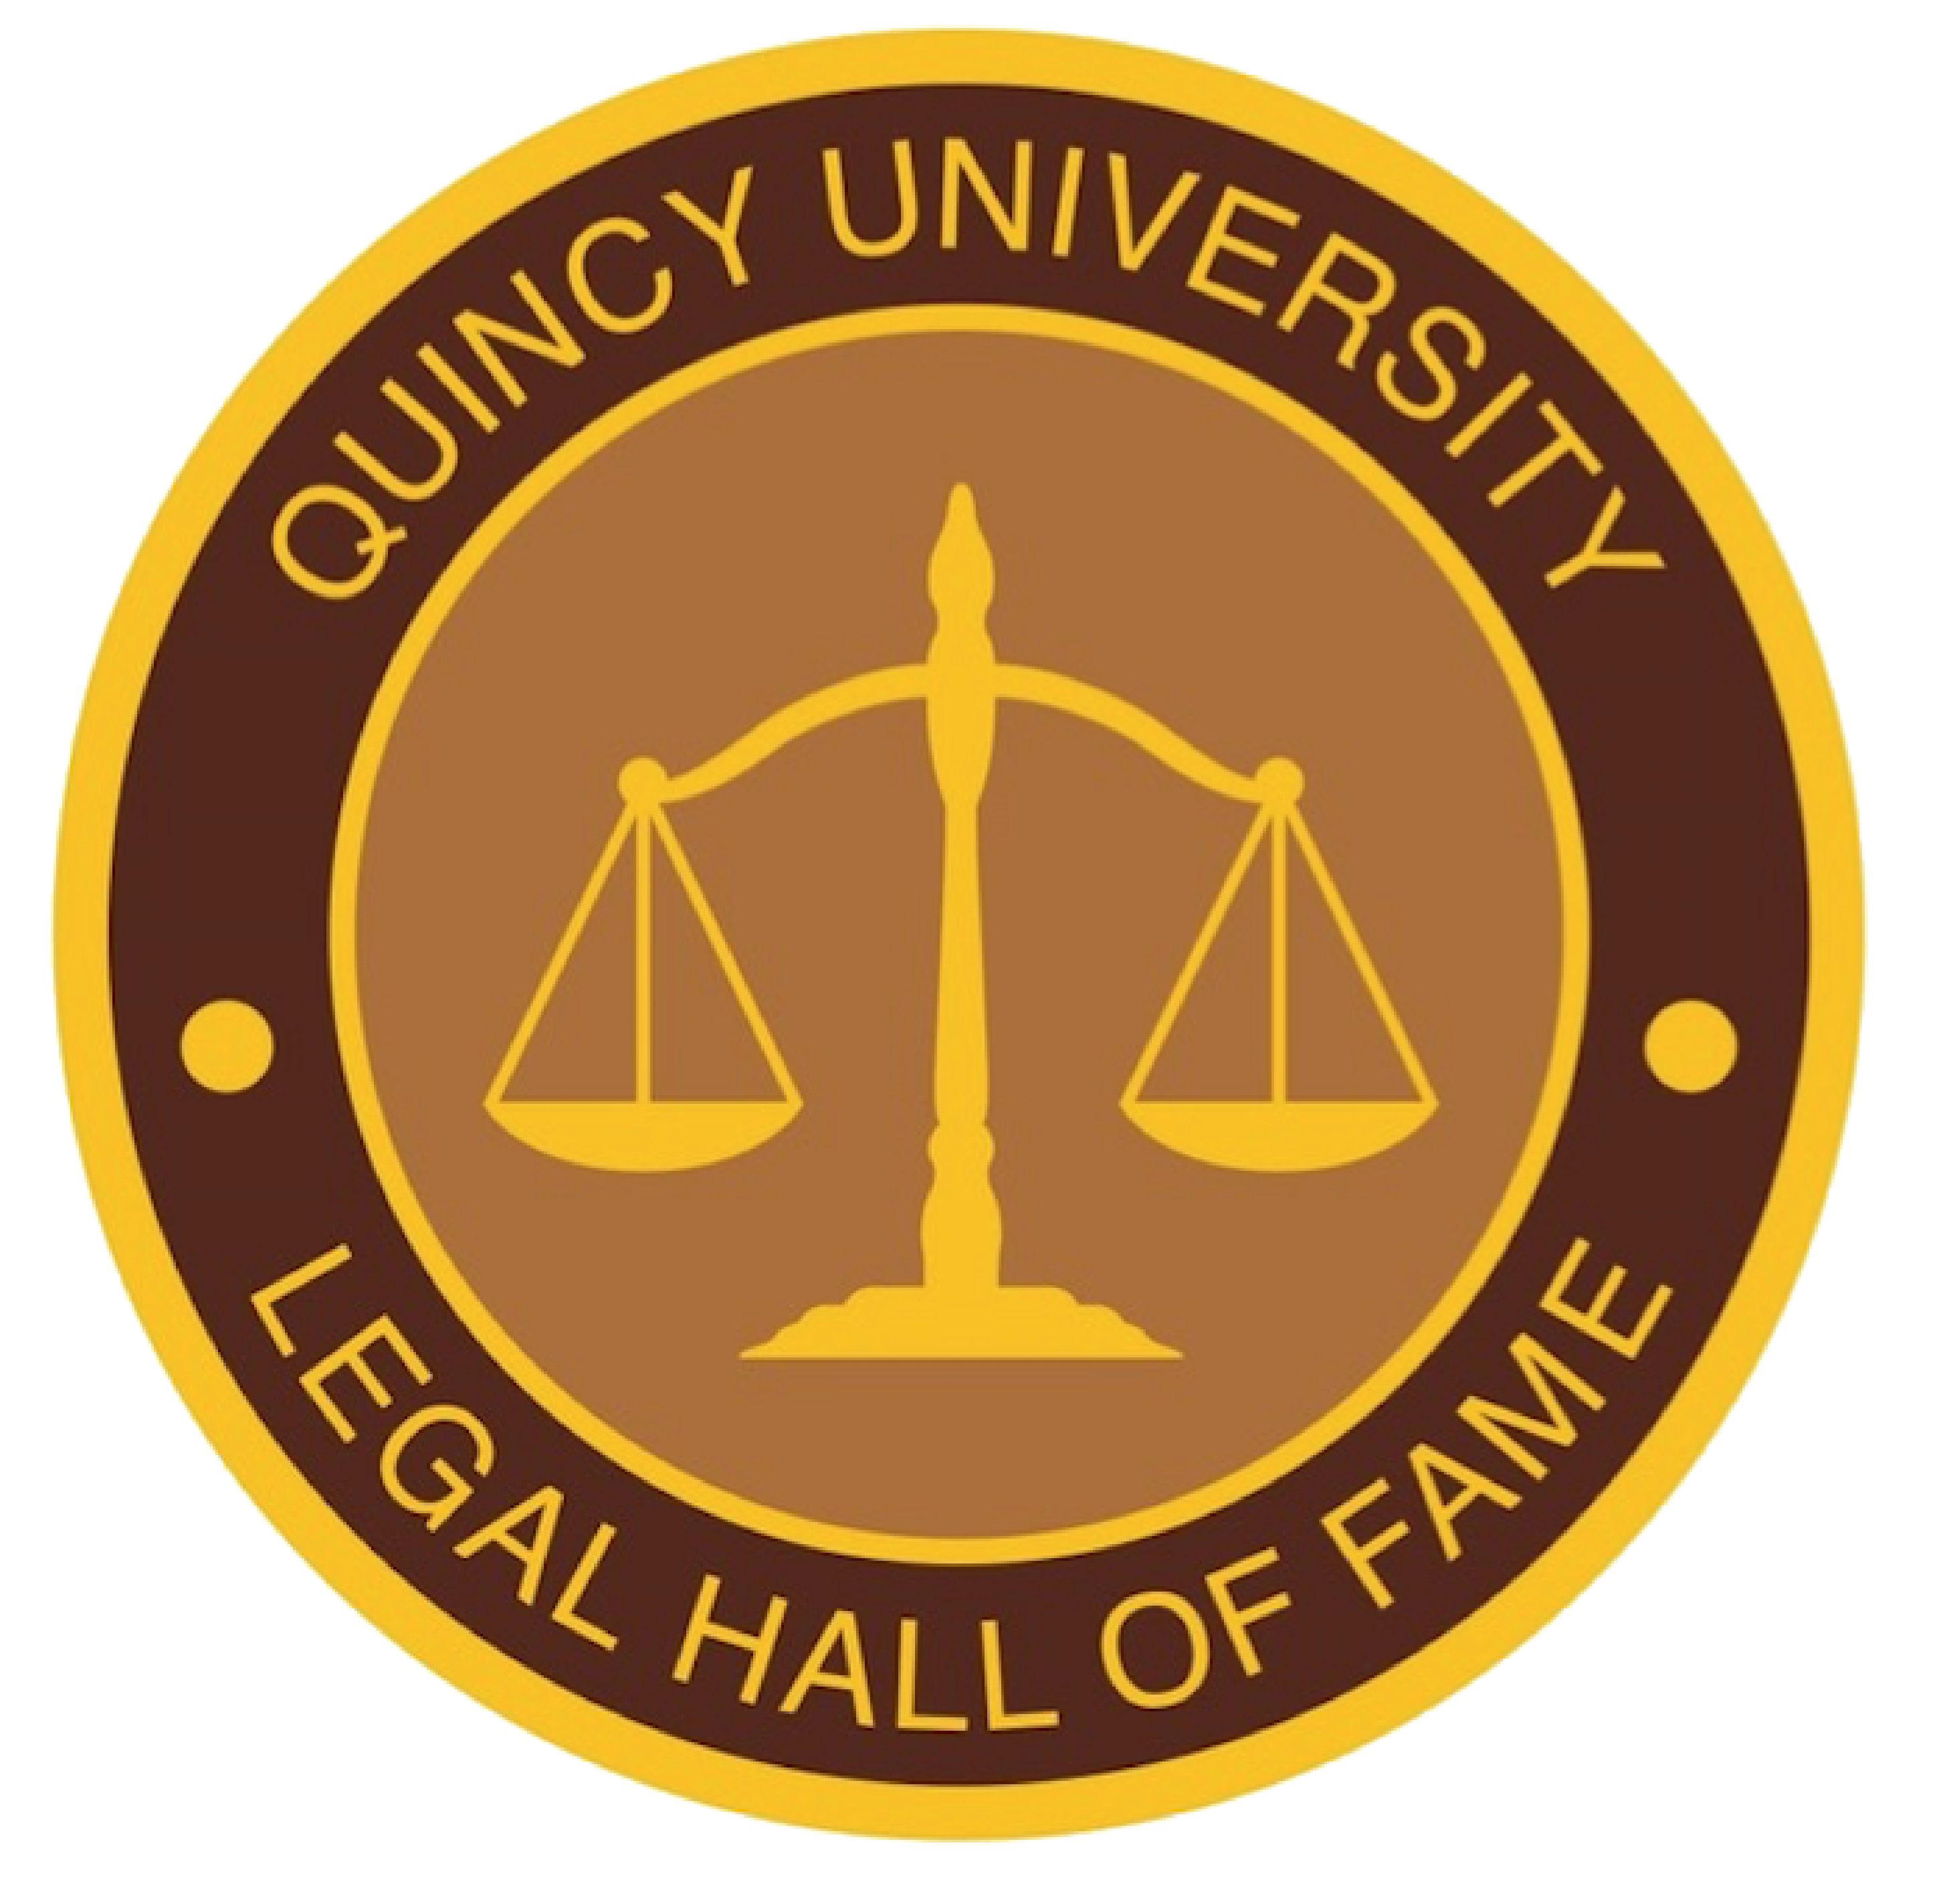 Legal Hall of Fame